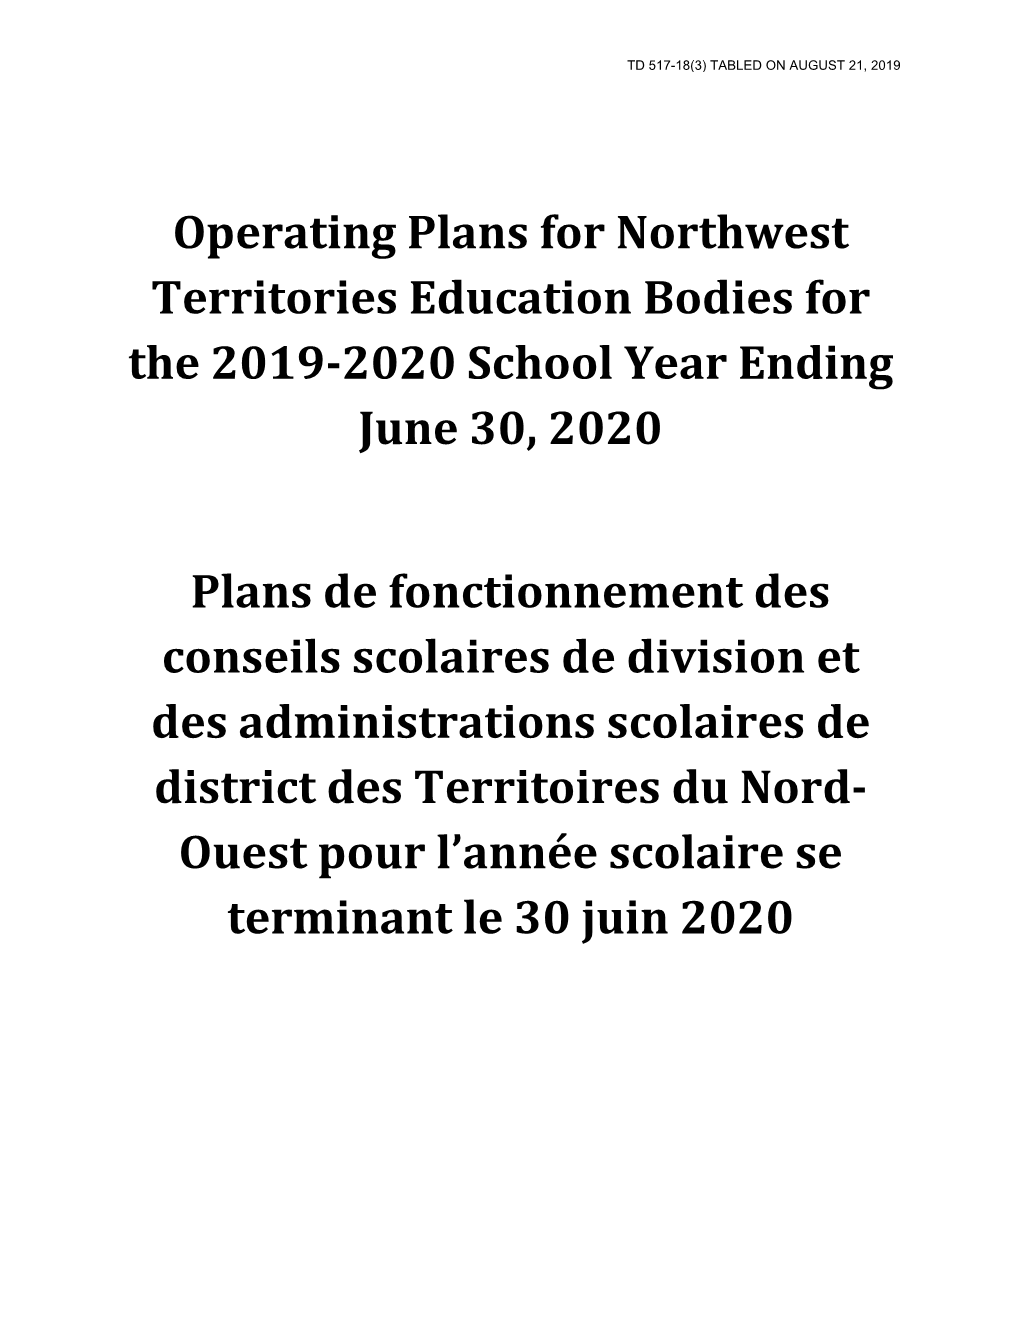 Operating Plans for Northwest Territories Education Bodies for the 2019-2020 School Year Ending June 30, 2020